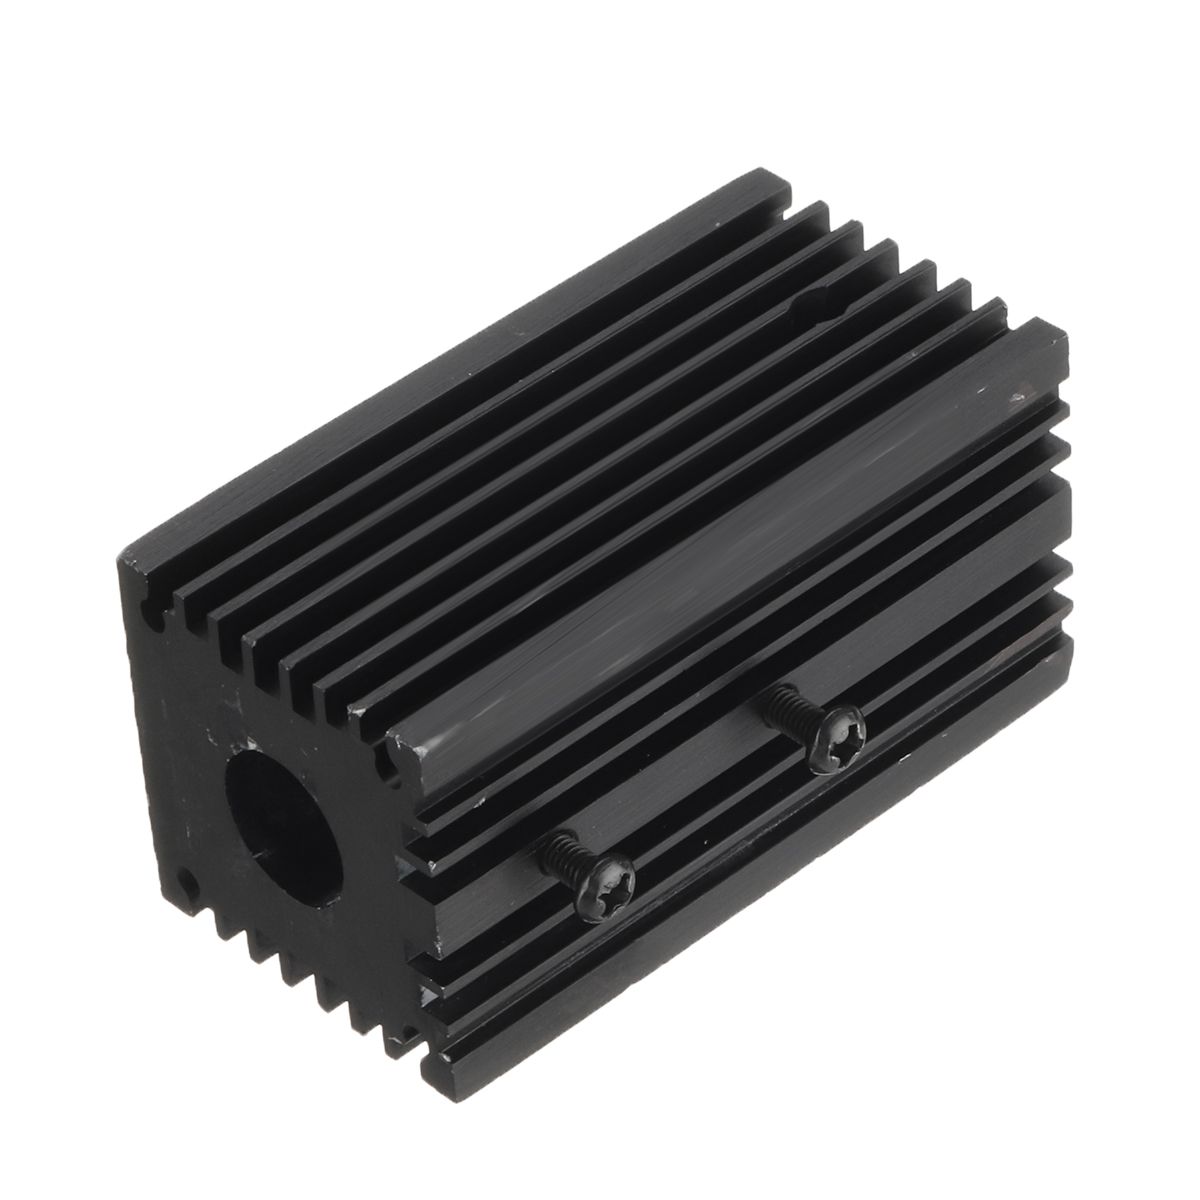 62x32x32mm-12mm-Aluminum-Heat-Sink-Groove-Fixed-Radiator-Seat-for-12mm-Laser-Diode-Module-1446032